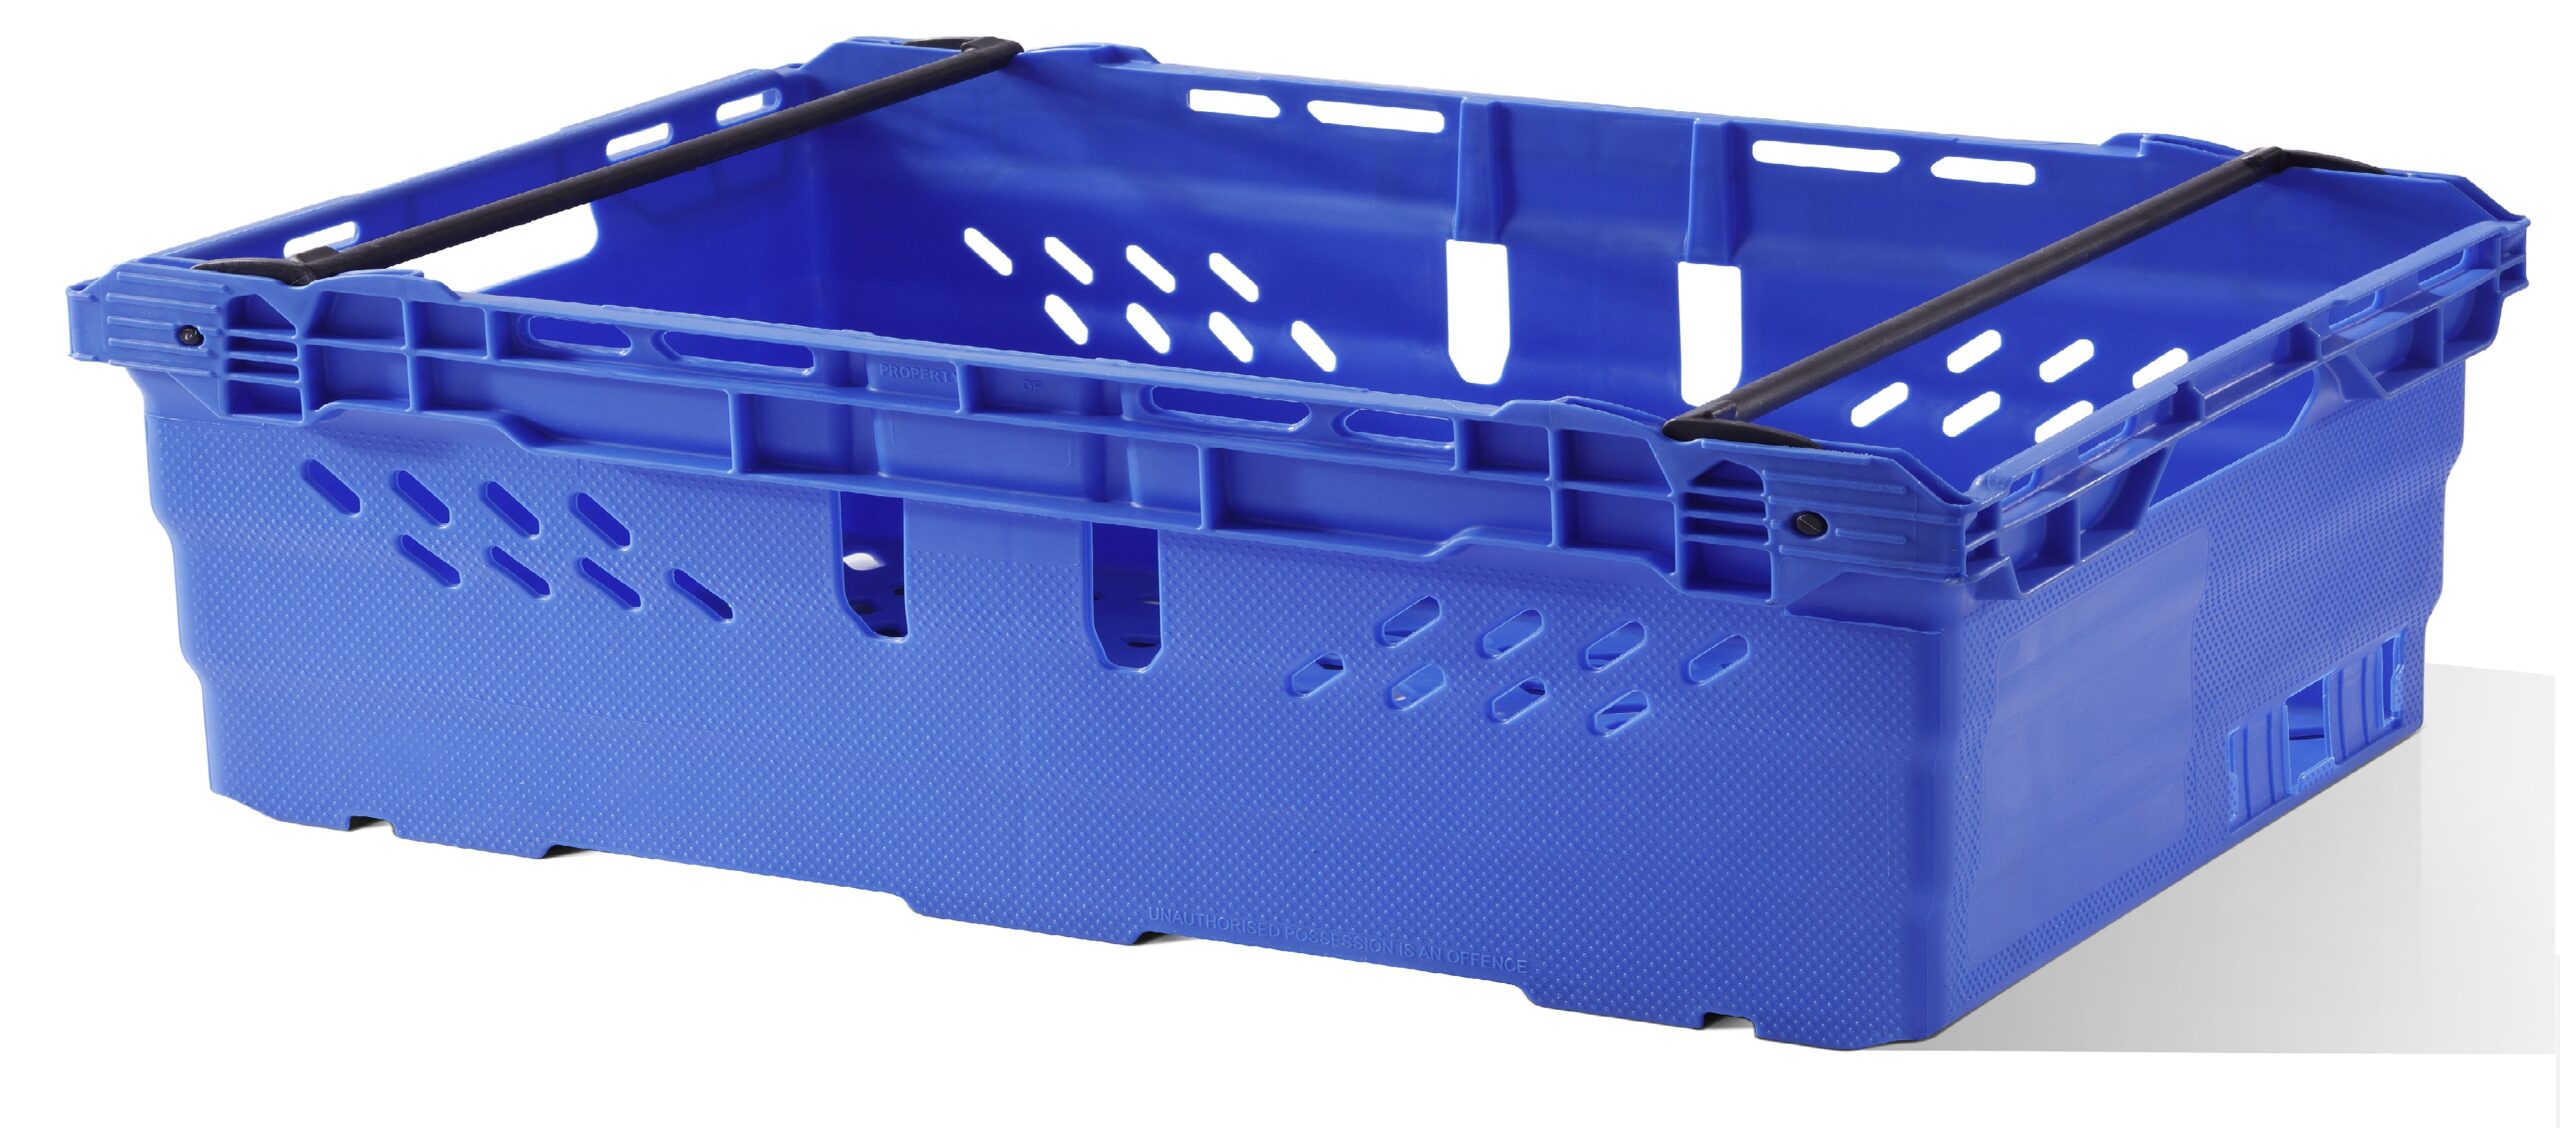 600x400x250 Bale Arm Crate - Green For Food Distribution